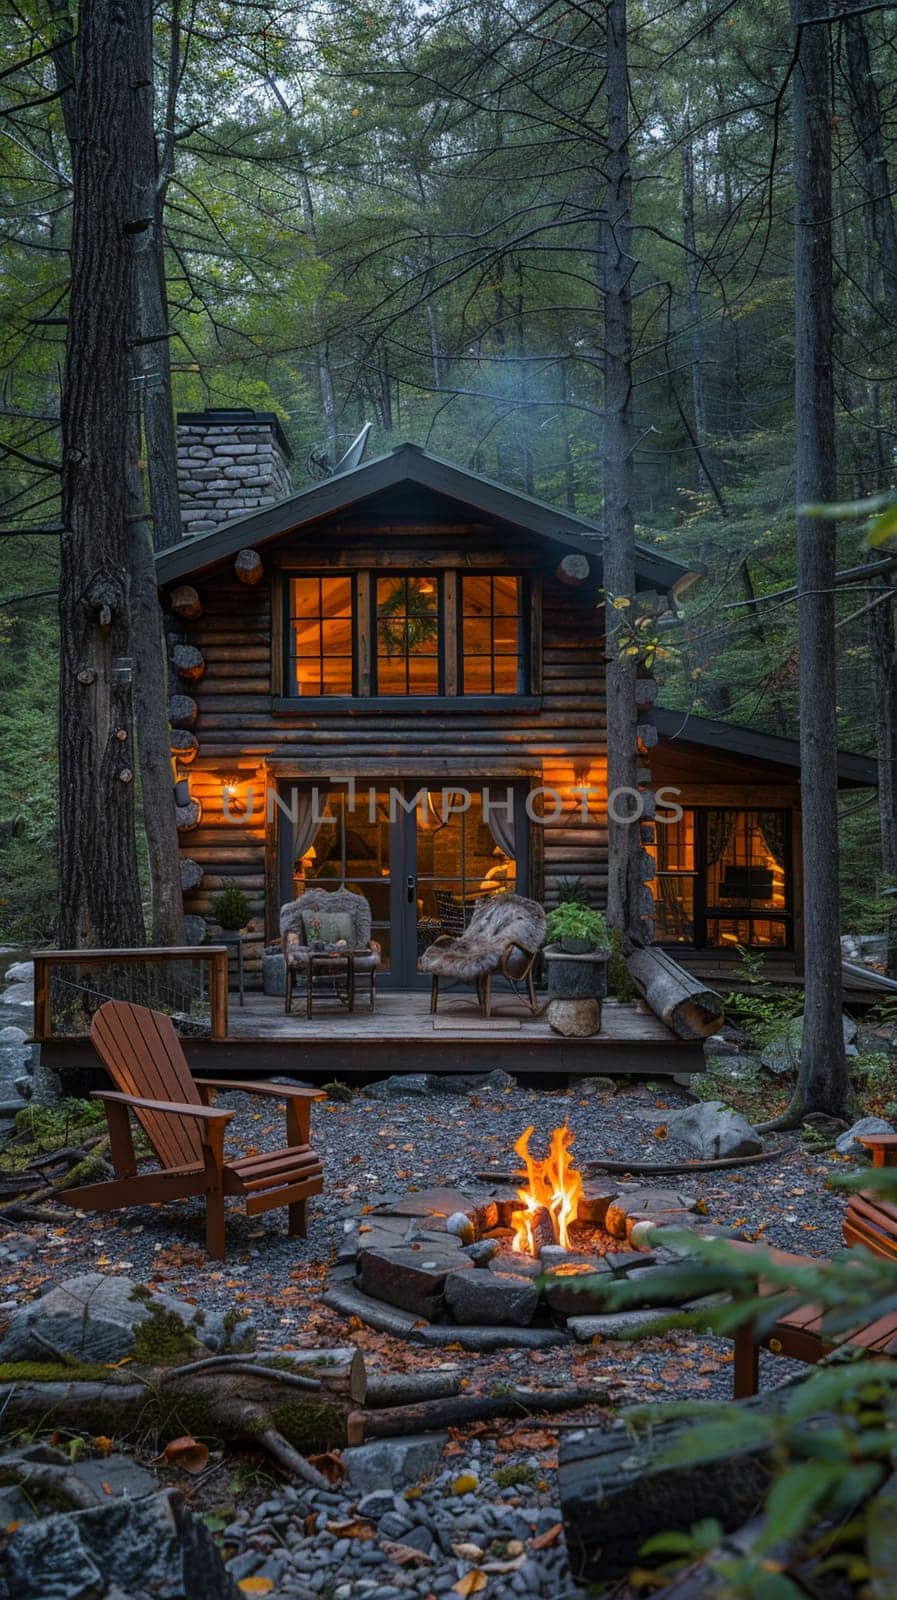 Log Cabin Surrounded by Forest with Outdoor Fire Pit, rustic retreat in nature.